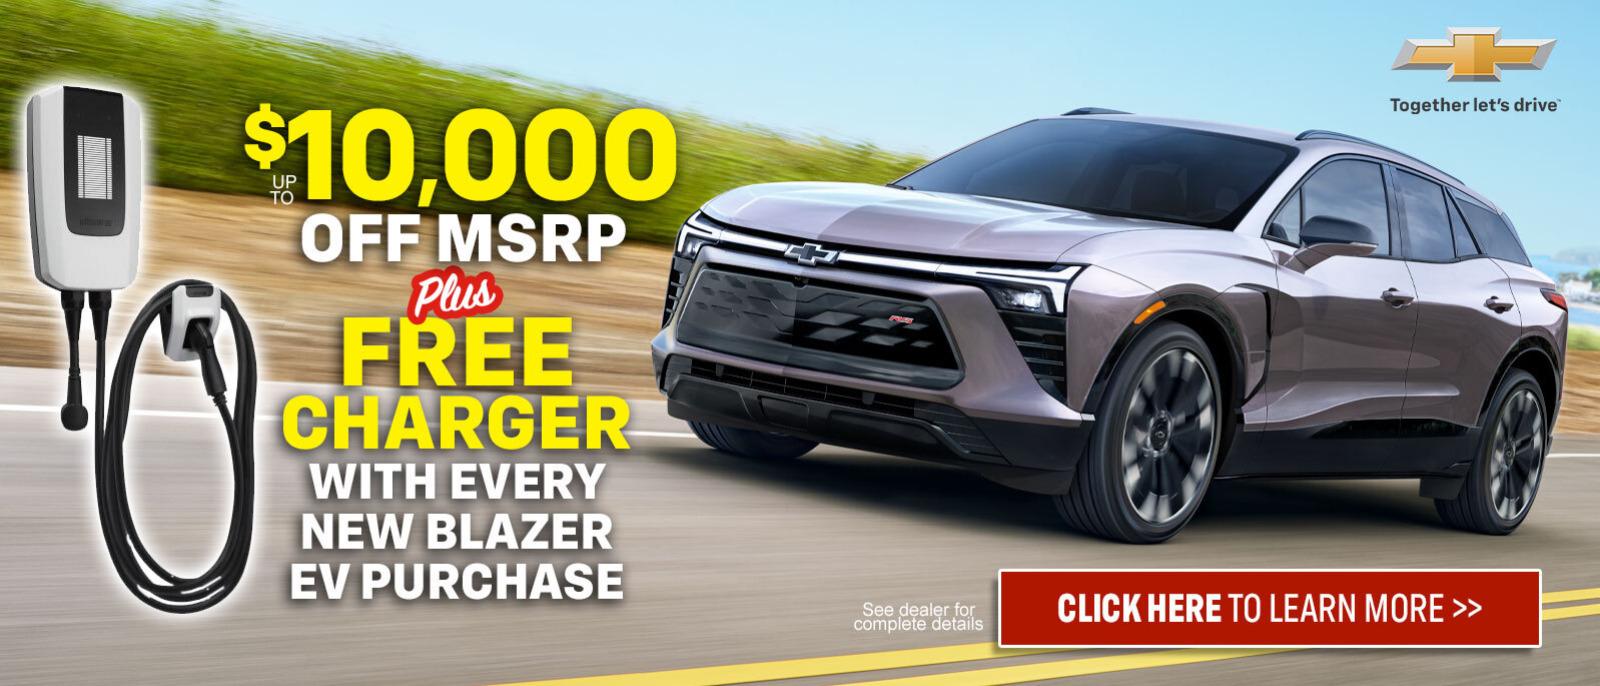 Up to 10,000 off MSRP Plus Free Charger with Every New Blazer EV Purchase